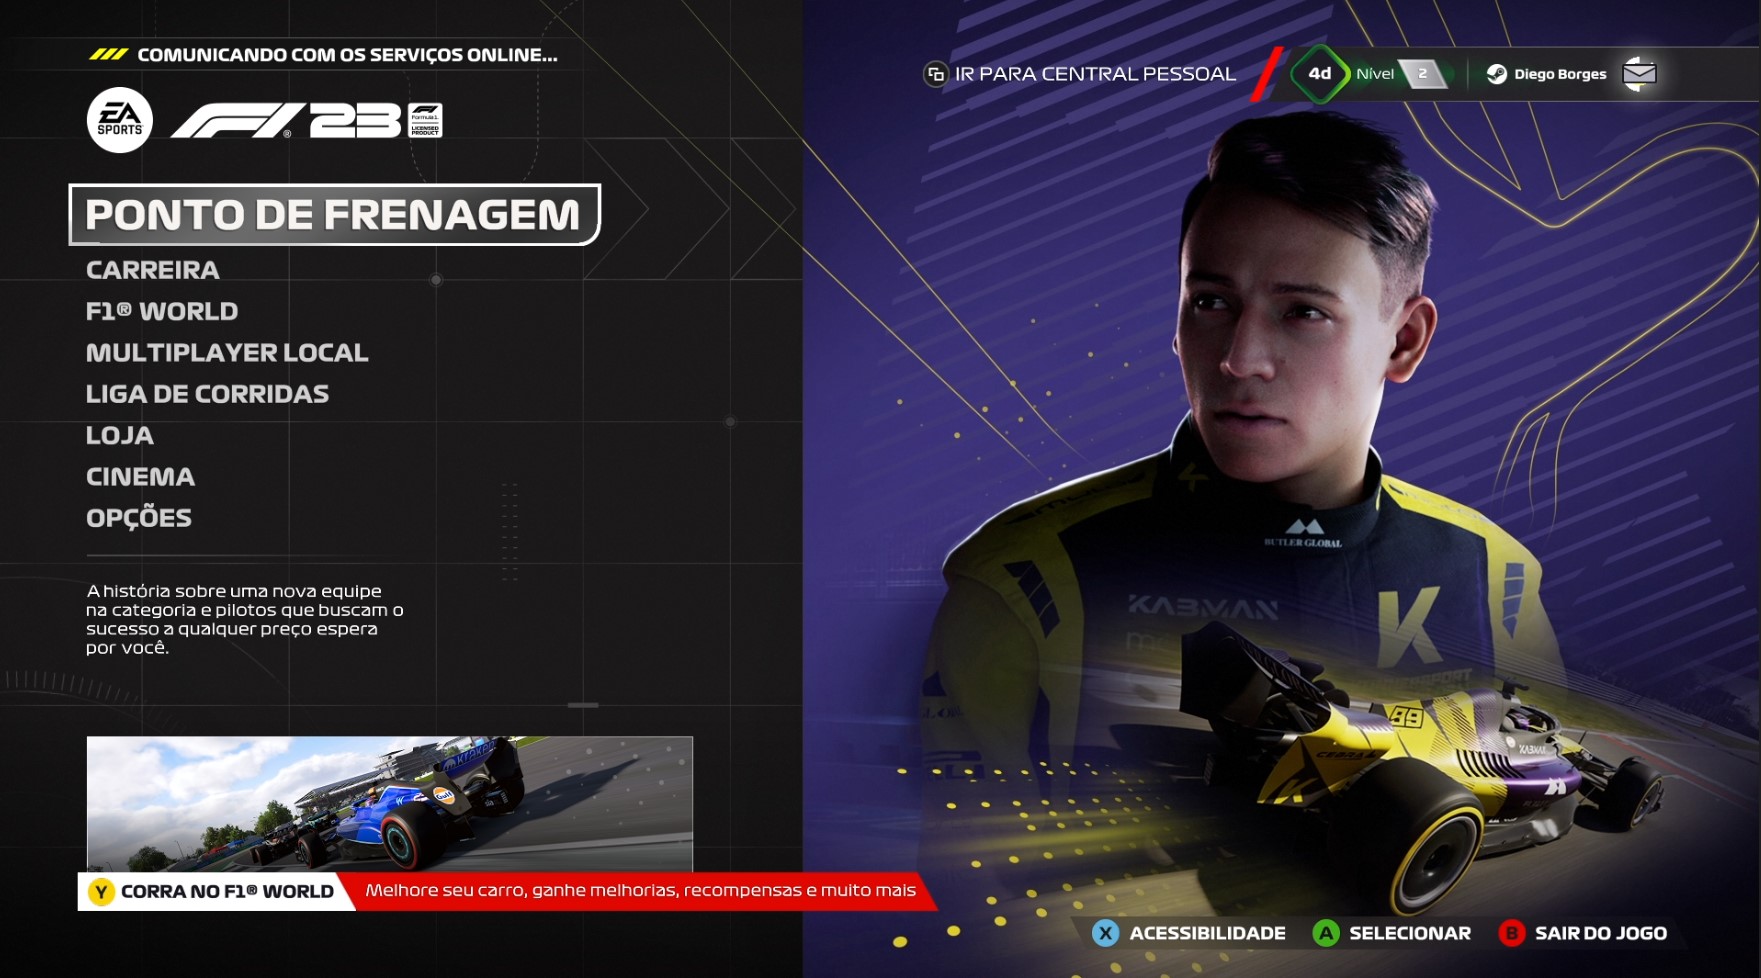 In addition to the brake point, F1 2023 has virtually the same game modes